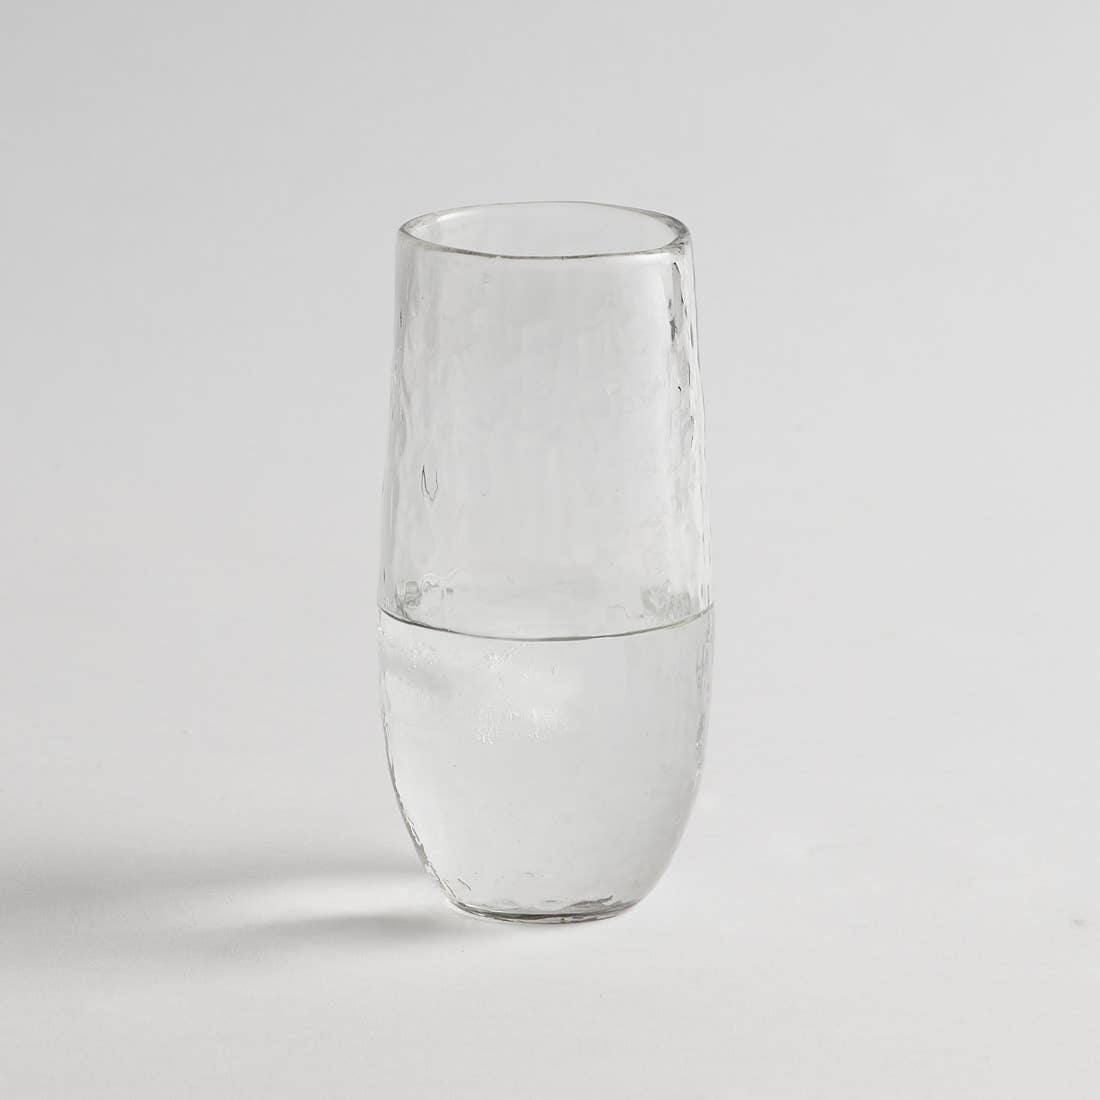 Hammered Drinking Glass